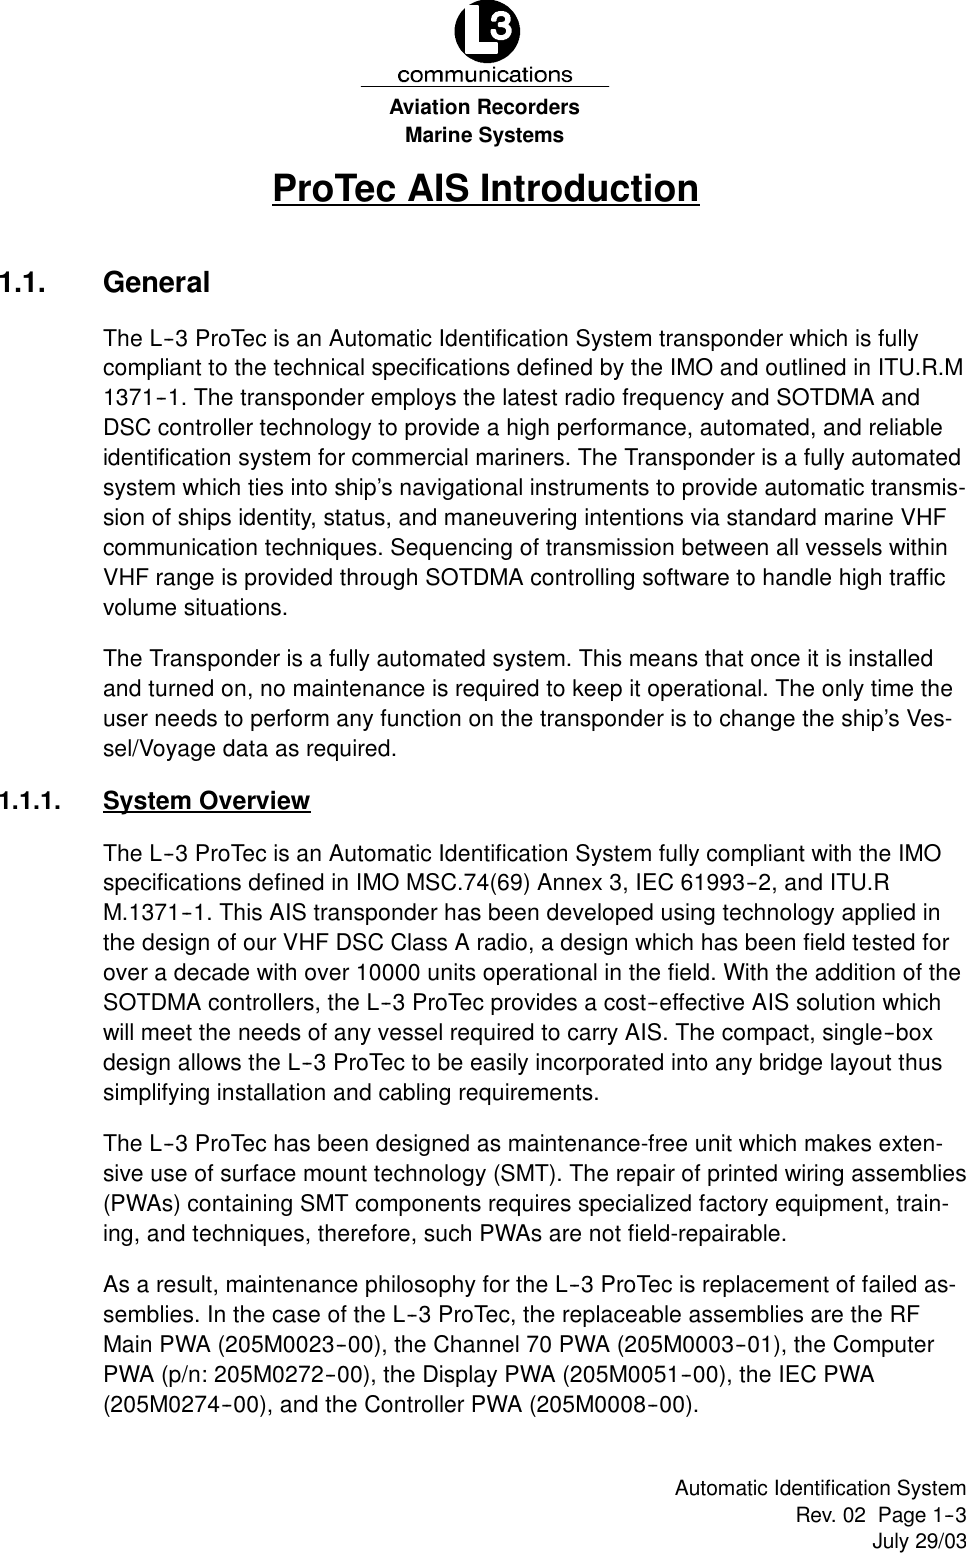 Marine SystemsAviation RecordersRev. 02 Page 1--3July 29/03Automatic Identification SystemProTec AIS Introduction1.1. GeneralThe L--3 ProTec is an Automatic Identification System transponder which is fullycompliant to the technical specifications defined by the IMO and outlined in ITU.R.M1371--1. The transponder employs the latest radio frequency and SOTDMA andDSC controller technology to provide a high performance, automated, and reliableidentification system for commercial mariners. The Transponder is a fully automatedsystem which ties into ship’s navigational instruments to provide automatic transmis-sion of ships identity, status, and maneuvering intentions via standard marine VHFcommunication techniques. Sequencing of transmission between all vessels withinVHF range is provided through SOTDMA controlling software to handle high trafficvolume situations.The Transponder is a fully automated system. This means that once it is installedand turned on, no maintenance is required to keep it operational. The only time theuser needs to perform any function on the transponder is to change the ship’s Ves-sel/Voyage data as required.1.1.1. System OverviewThe L--3 ProTec is an Automatic Identification System fully compliant with the IMOspecifications defined in IMO MSC.74(69) Annex 3, IEC 61993--2, and ITU.RM.1371--1. This AIS transponder has been developed using technology applied inthe design of our VHF DSC Class A radio, a design which has been field tested forover a decade with over 10000 units operational in the field. With the addition of theSOTDMA controllers, the L--3 ProTec provides a cost--effective AIS solution whichwill meet the needs of any vessel required to carry AIS. The compact, single--boxdesign allows the L--3 ProTec to be easily incorporated into any bridge layout thussimplifying installation and cabling requirements.The L--3 ProTec has been designed as maintenance-free unit which makes exten-sive use of surface mount technology (SMT). The repair of printed wiring assemblies(PWAs) containing SMT components requires specialized factory equipment, train-ing, and techniques, therefore, such PWAs are not field-repairable.As a result, maintenance philosophy for the L--3 ProTec is replacement of failed as-semblies. In the case of the L--3 ProTec, the replaceable assemblies are the RFMain PWA (205M0023--00), the Channel 70 PWA (205M0003--01), the ComputerPWA (p/n: 205M0272--00), the Display PWA (205M0051--00), the IEC PWA(205M0274--00), and the Controller PWA (205M0008--00).